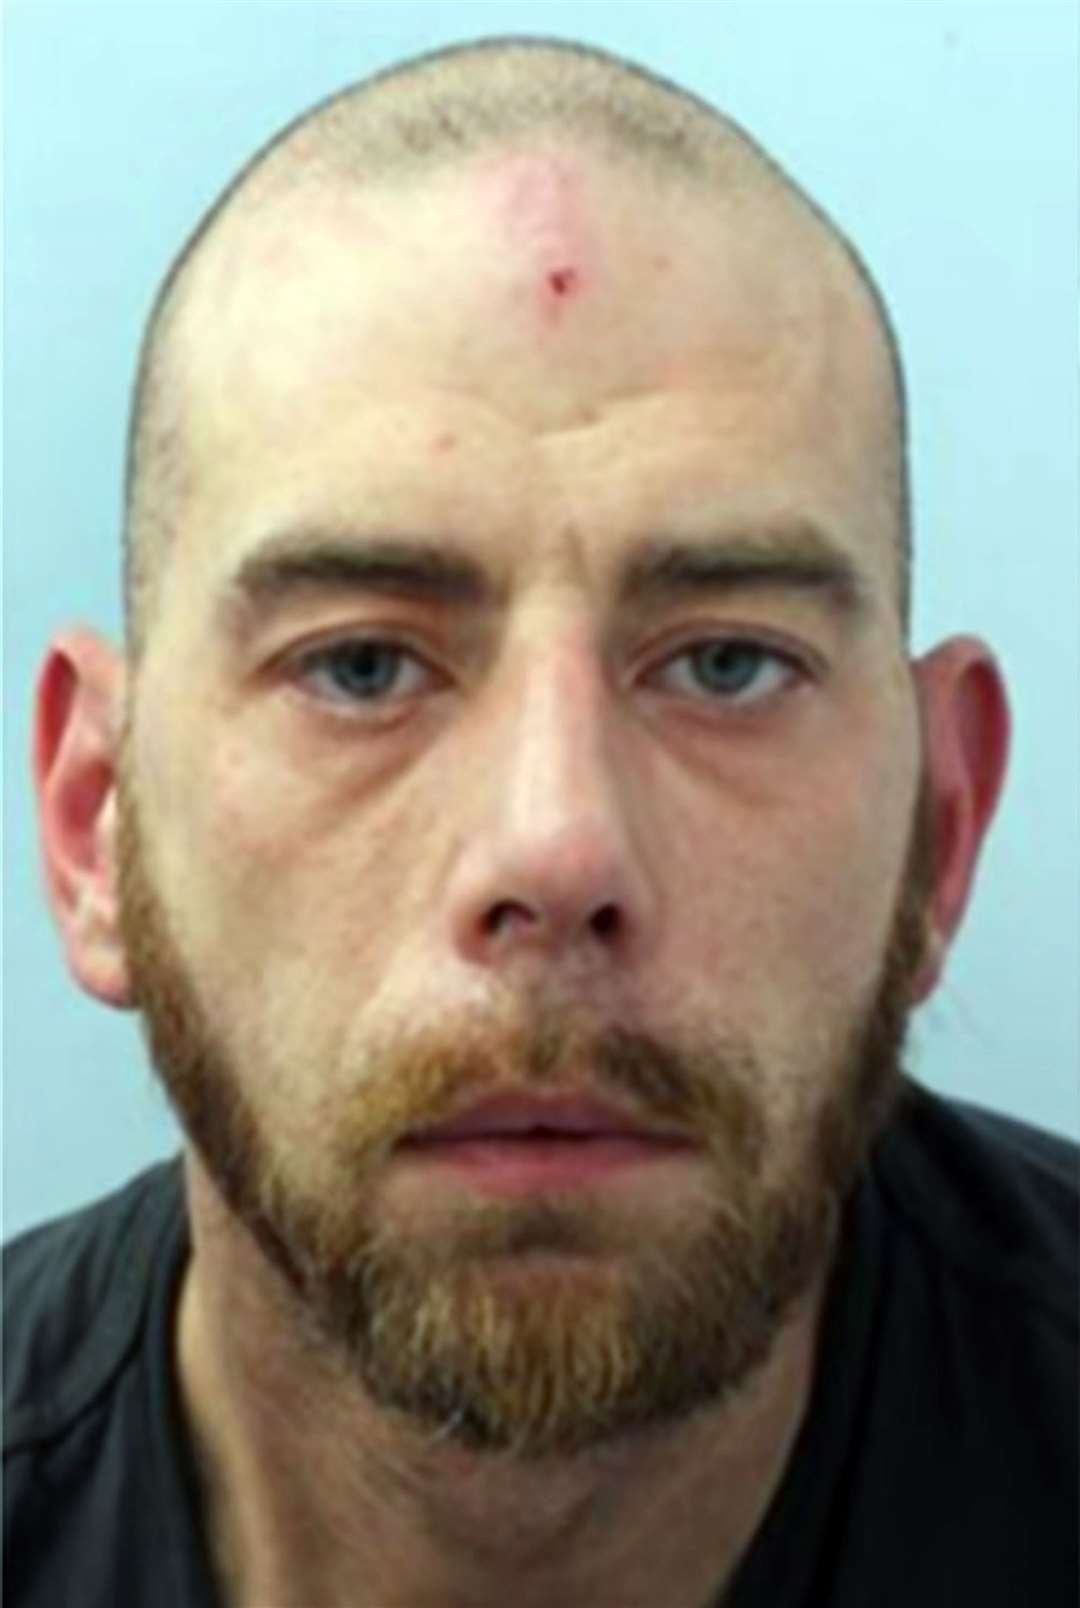 James Bex, 35, who police wish to trace after a serious sexual assault on an elderly woman (Met Police)